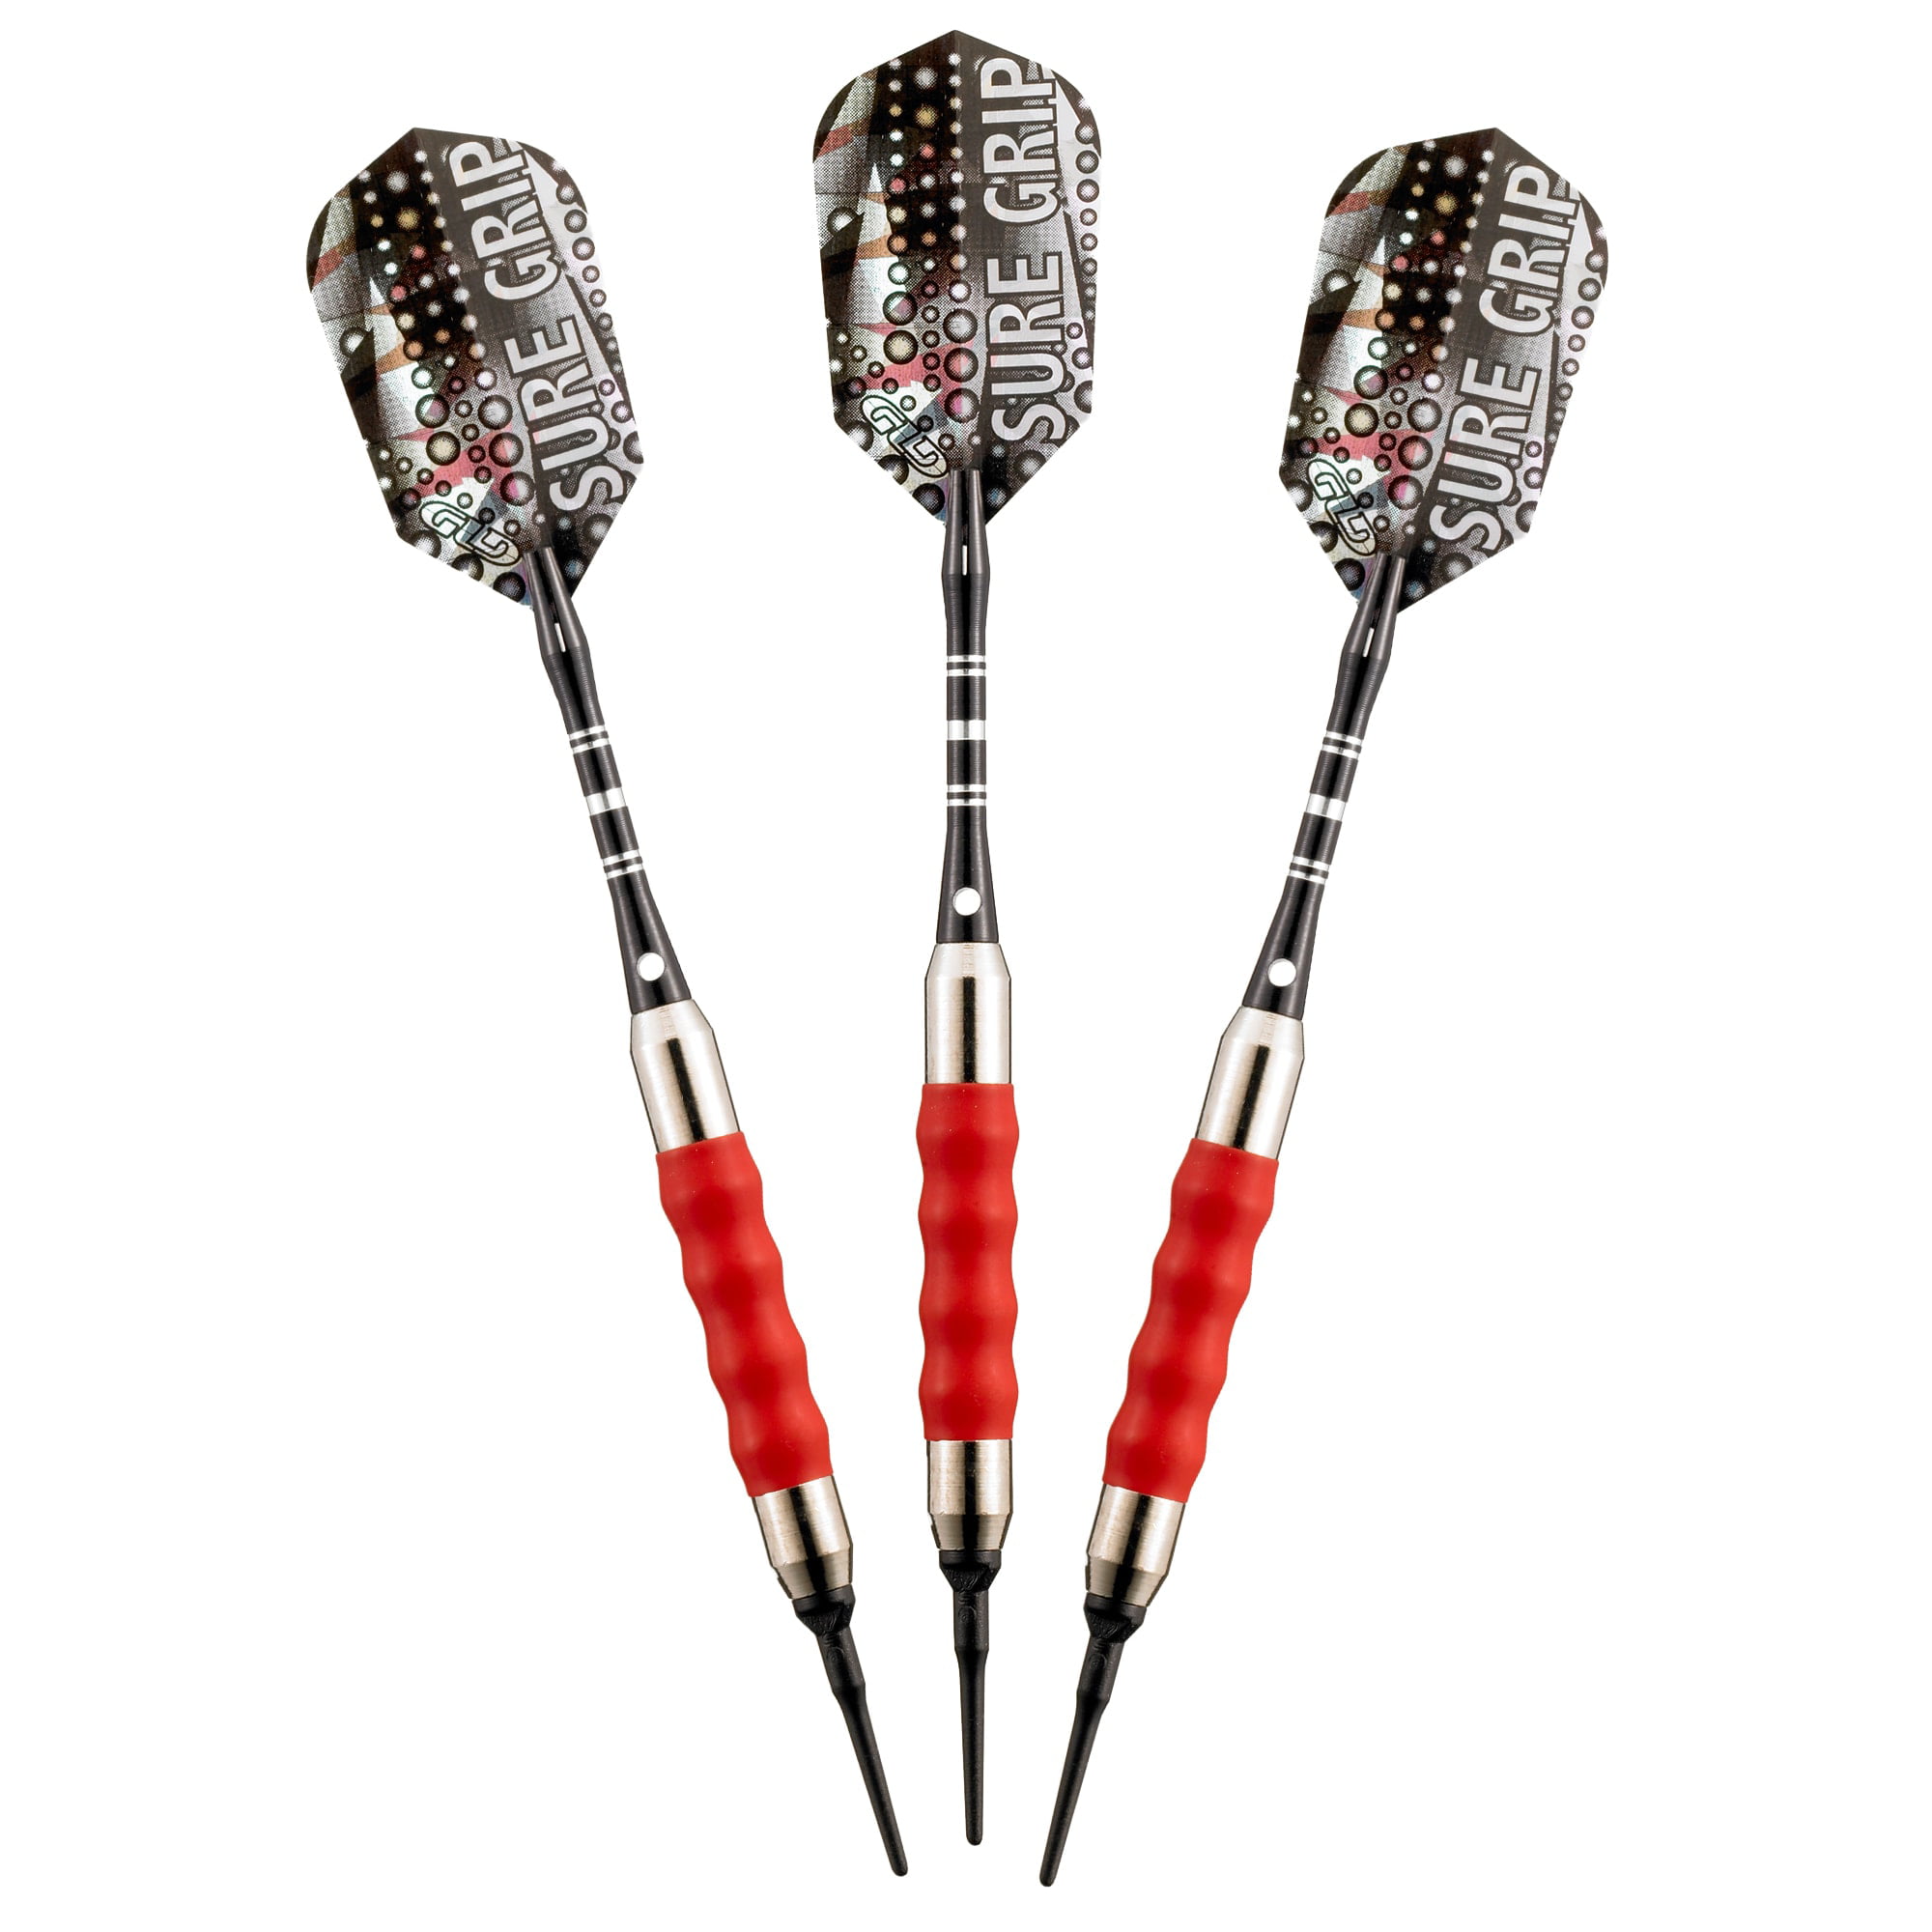 Viper Sure Grip RED 16 or 18 gm Soft Tip Dart Set with Flame Flights 